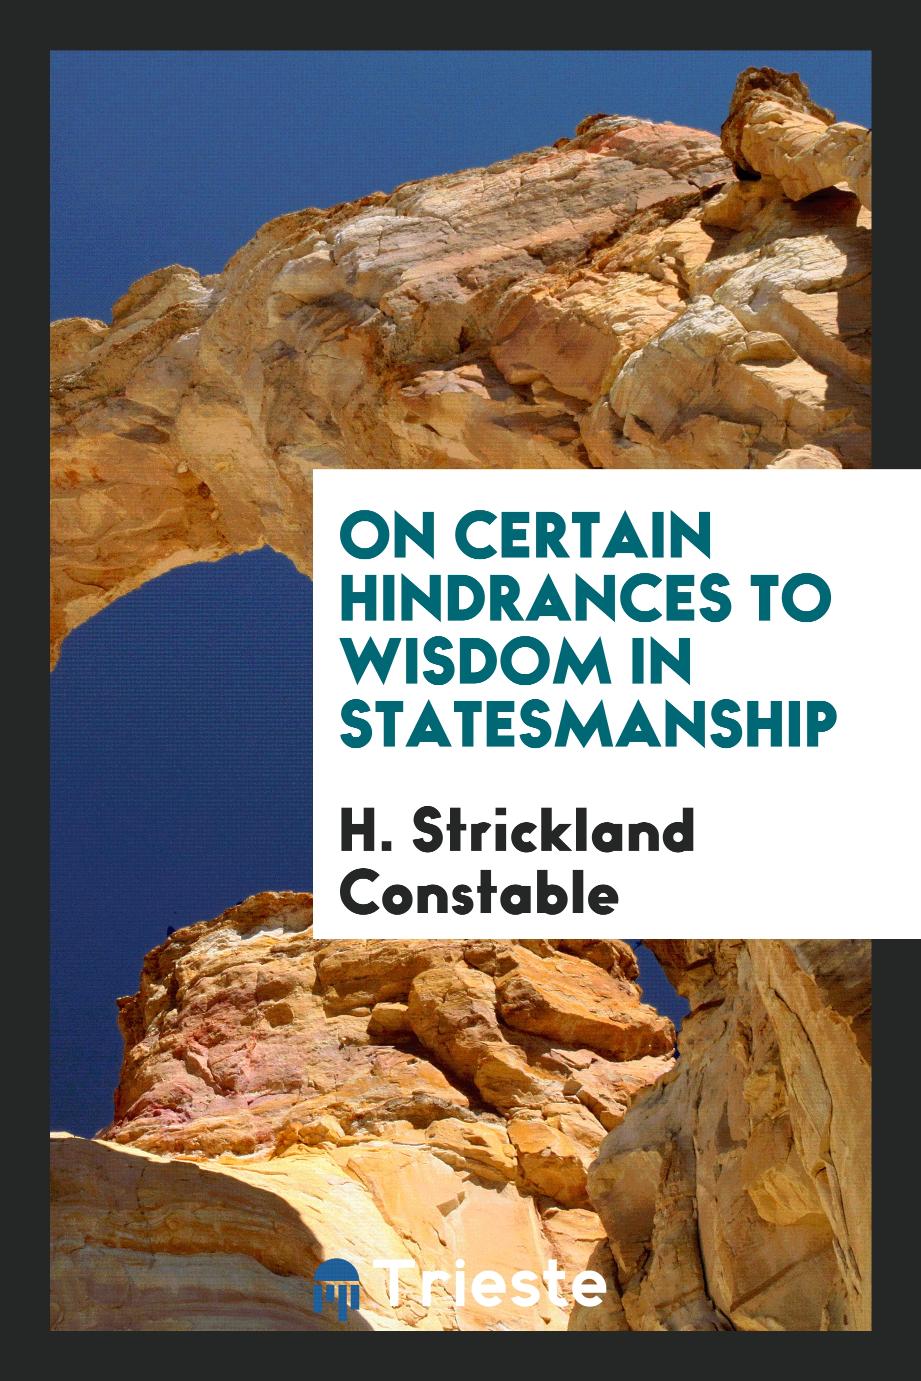 On Certain Hindrances to Wisdom in Statesmanship